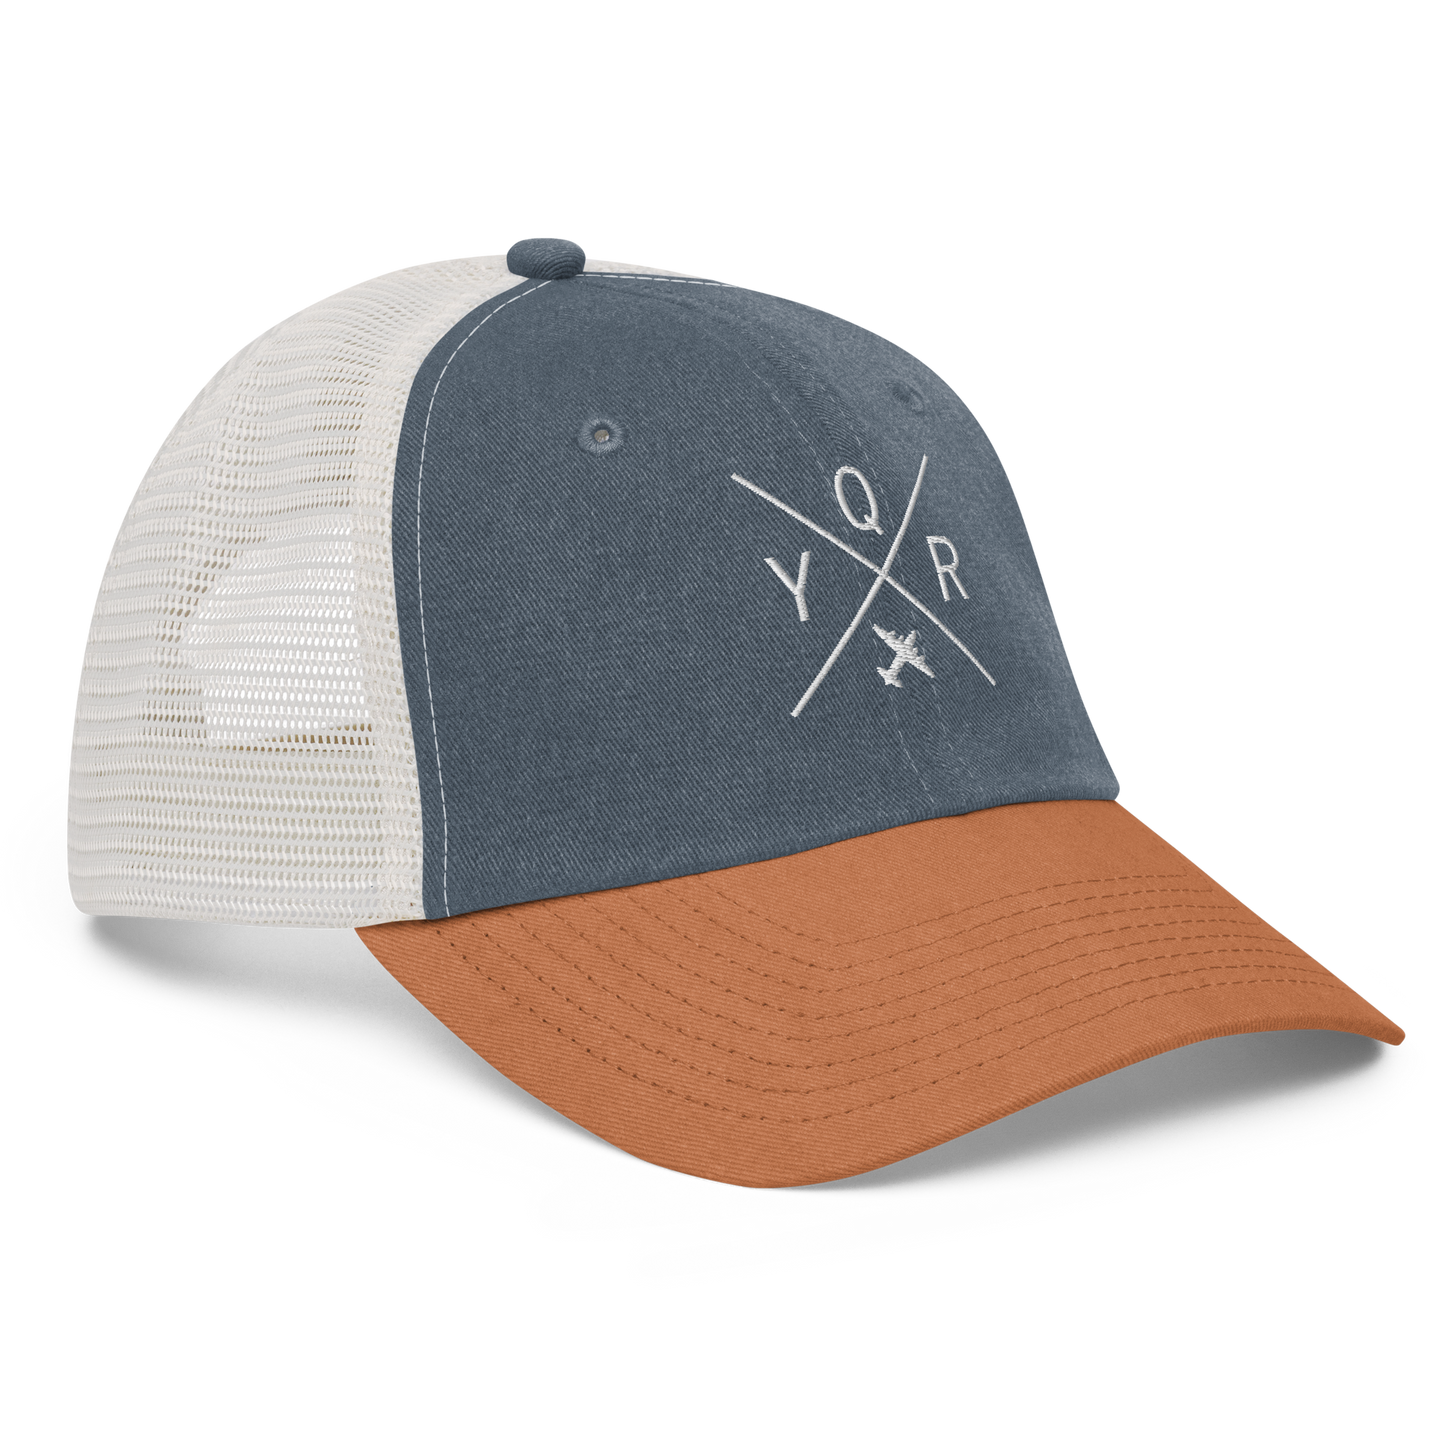 YHM Designs - YQR Regina Pigment-Dyed Trucker Cap - Crossed-X Design with Airport Code and Vintage Propliner - White Embroidery - Image 16